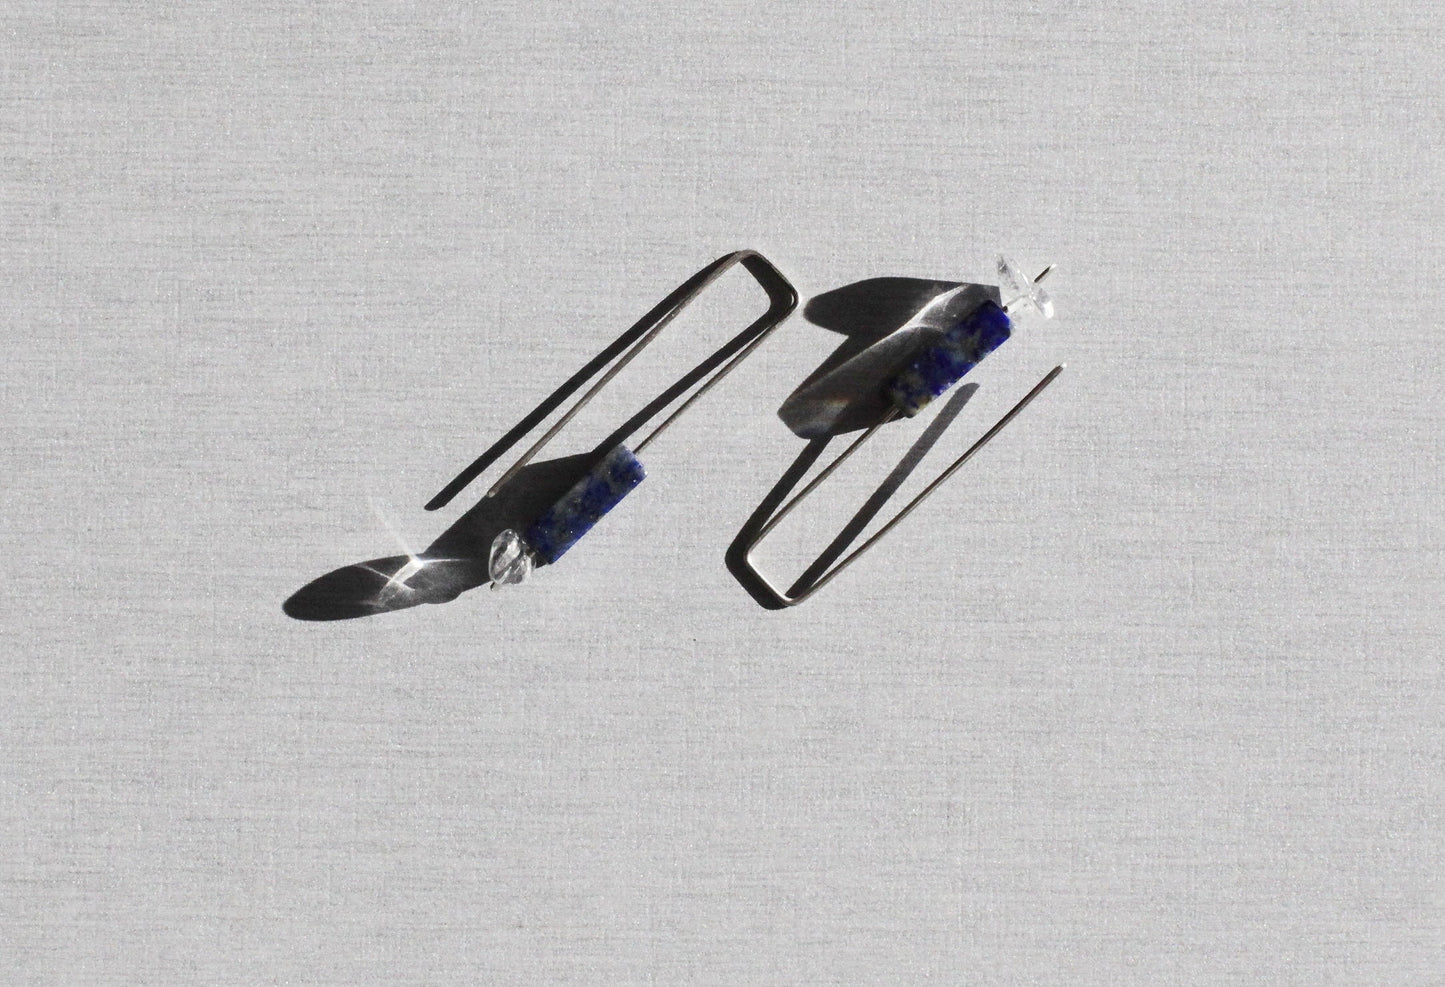 Lapis lazuli and crystal quartz sterling silver earrings